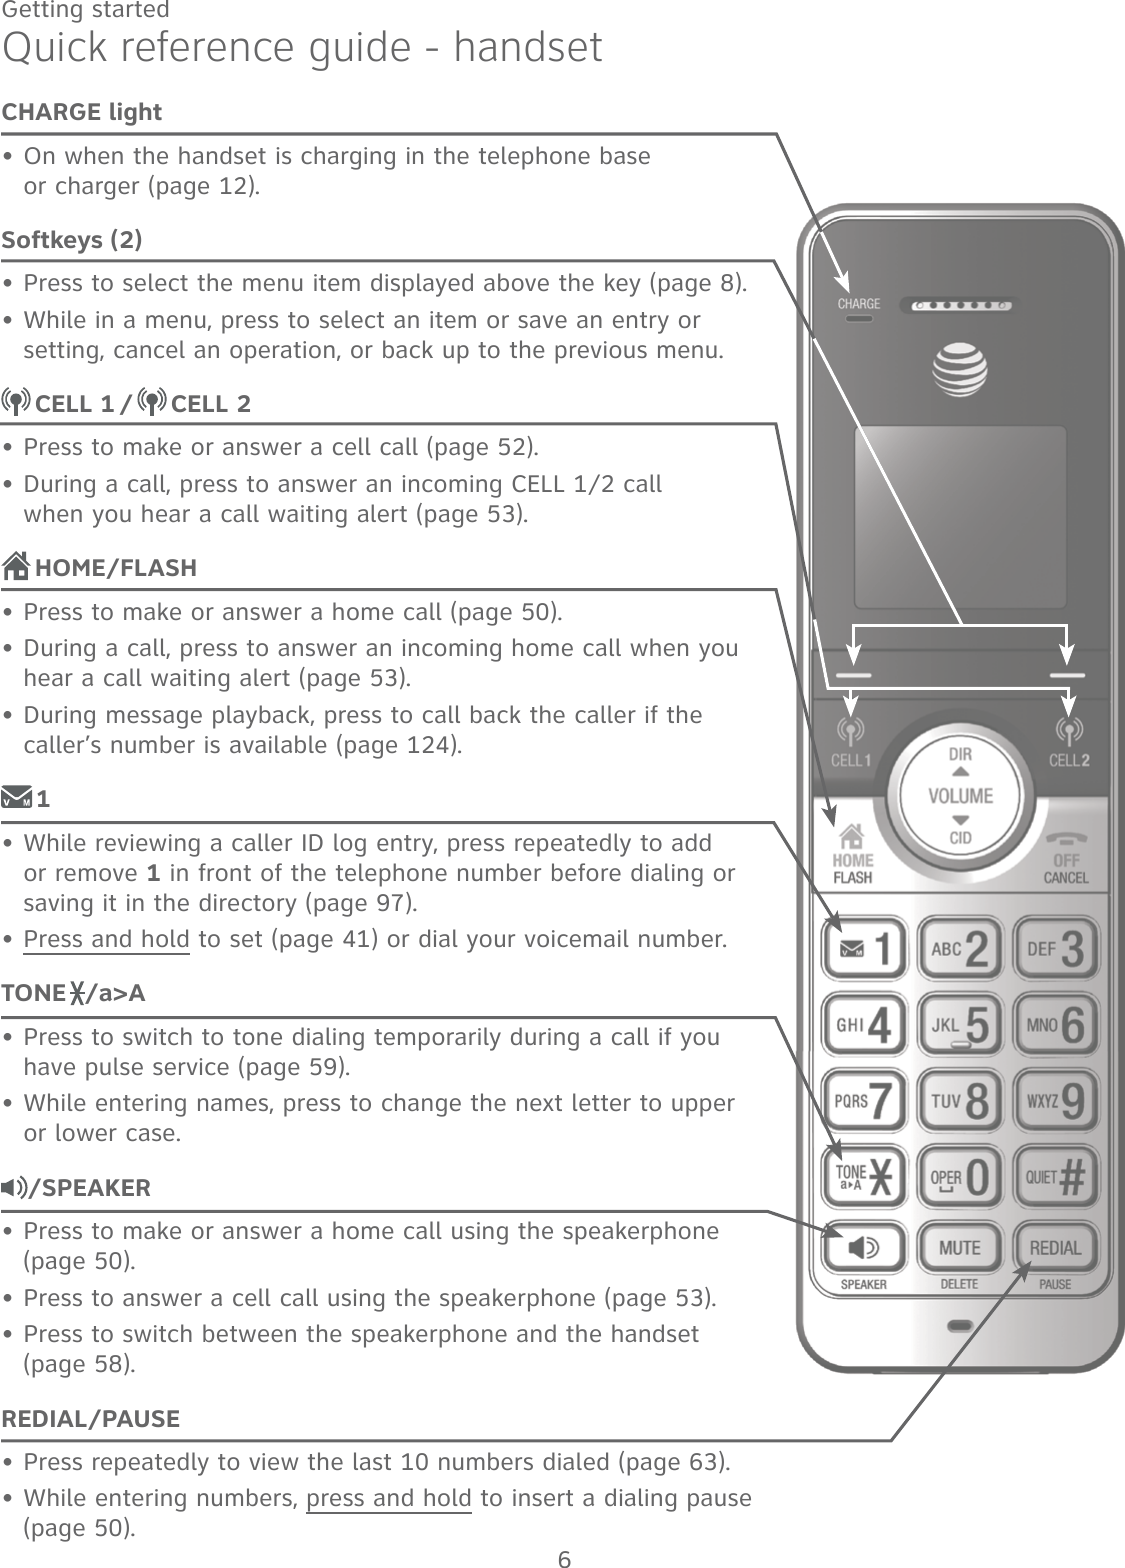 6Getting startedQuick reference guide - handsetCHARGE lightOn when the handset is charging in the telephone base  or charger (page 12).Softkeys (2)Press to select the menu item displayed above the key (page 8).While in a menu, press to select an item or save an entry or  setting, cancel an operation, or back up to the previous menu. CELL 1 /   CELL 2Press to make or answer a cell call (page 52).During a call, press to answer an incoming CELL 1/2 call  when you hear a call waiting alert (page 53). HOME/FLASHPress to make or answer a home call (page 50).During a call, press to answer an incoming home call when you hear a call waiting alert (page 53).During message playback, press to call back the caller if the  caller’s number is available (page 124). 1While reviewing a caller ID log entry, press repeatedly to add or remove 1 in front of the telephone number before dialing or saving it in the directory (page 97).Press and hold to set (page 41) or dial your voicemail number.TONE /a&gt;APress to switch to tone dialing temporarily during a call if you have pulse service (page 59).While entering names, press to change the next letter to upper  or lower case./SPEAKERPress to make or answer a home call using the speakerphone (page 50).Press to answer a cell call using the speakerphone (page 53).Press to switch between the speakerphone and the handset  (page 58).REDIAL/PAUSEPress repeatedly to view the last 10 numbers dialed (page 63).While entering numbers, press and hold to insert a dialing pause (page 50).•••••••••••••••••